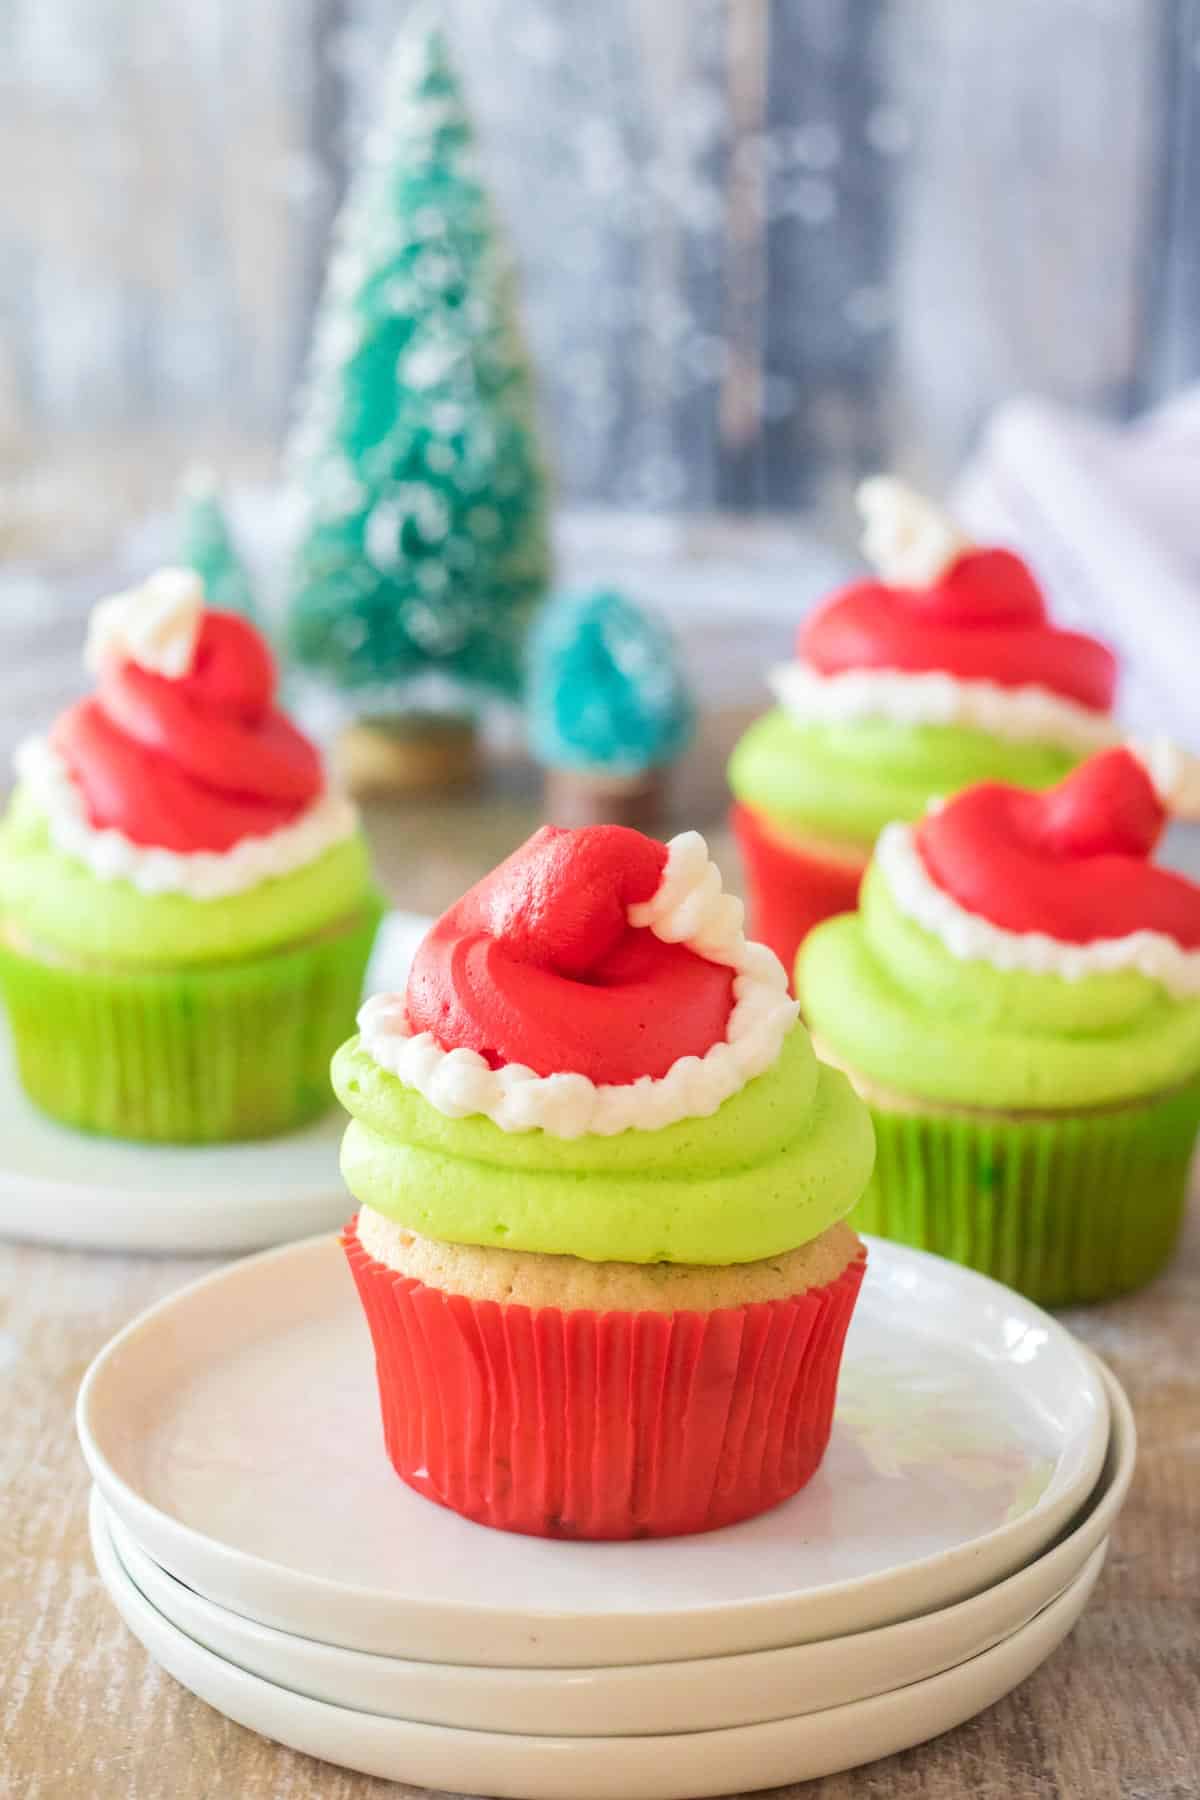 Grinch Cupcakes with green frosting and red and white frosting santa hats